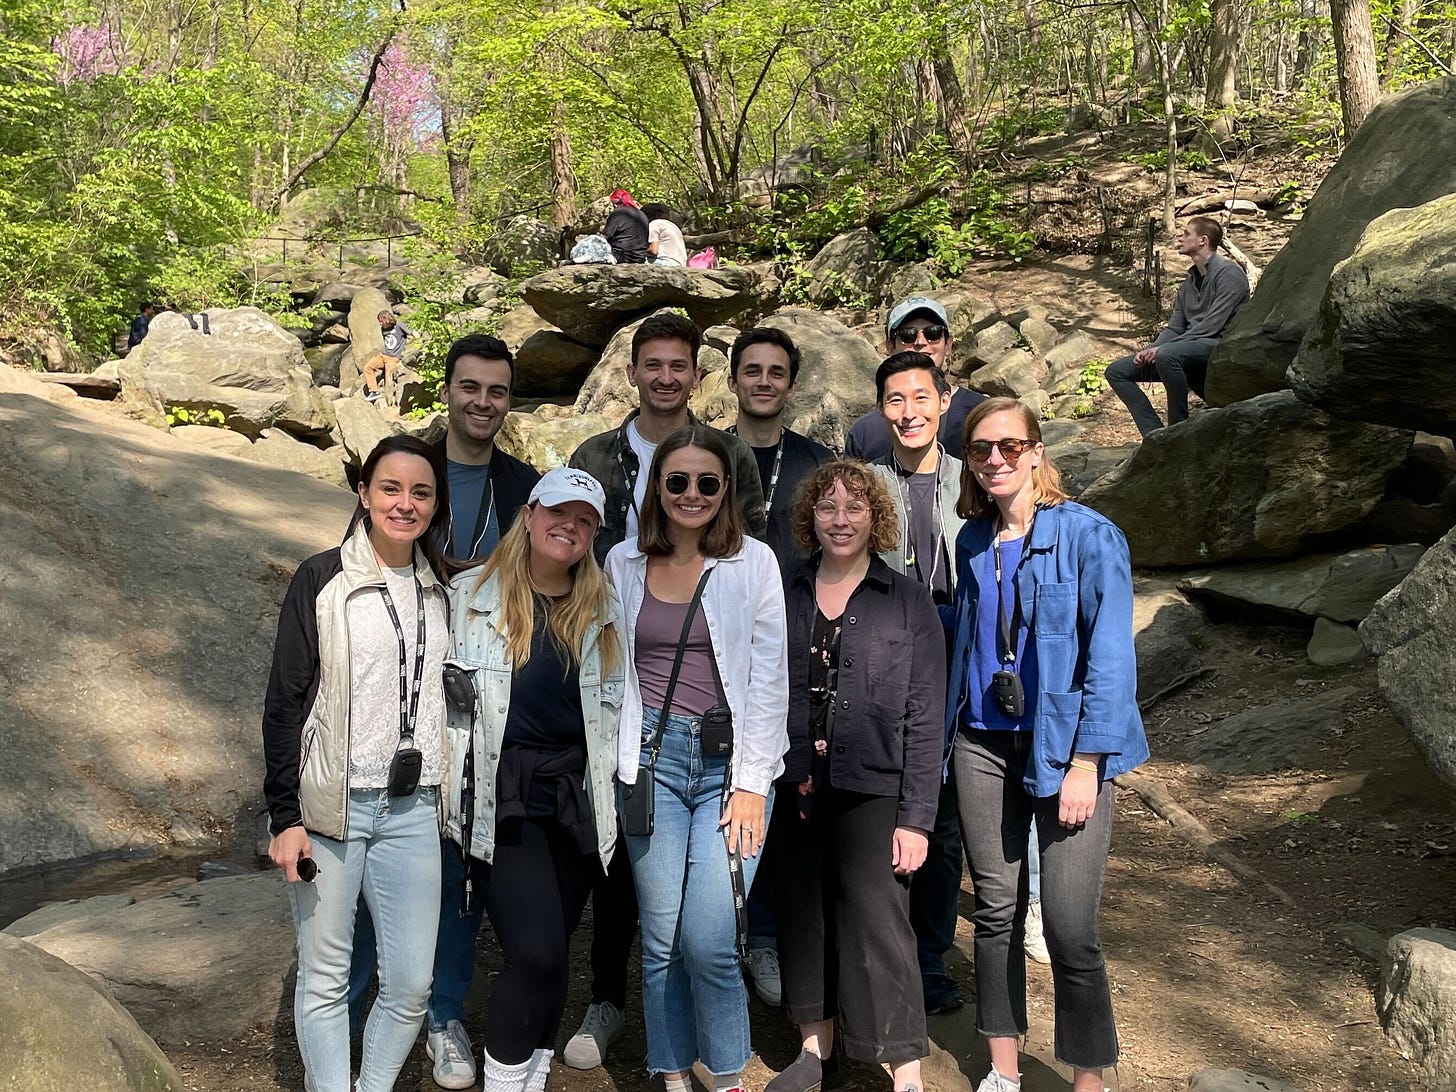 A group of people are surrounded by rocks and trees and appear to be happy